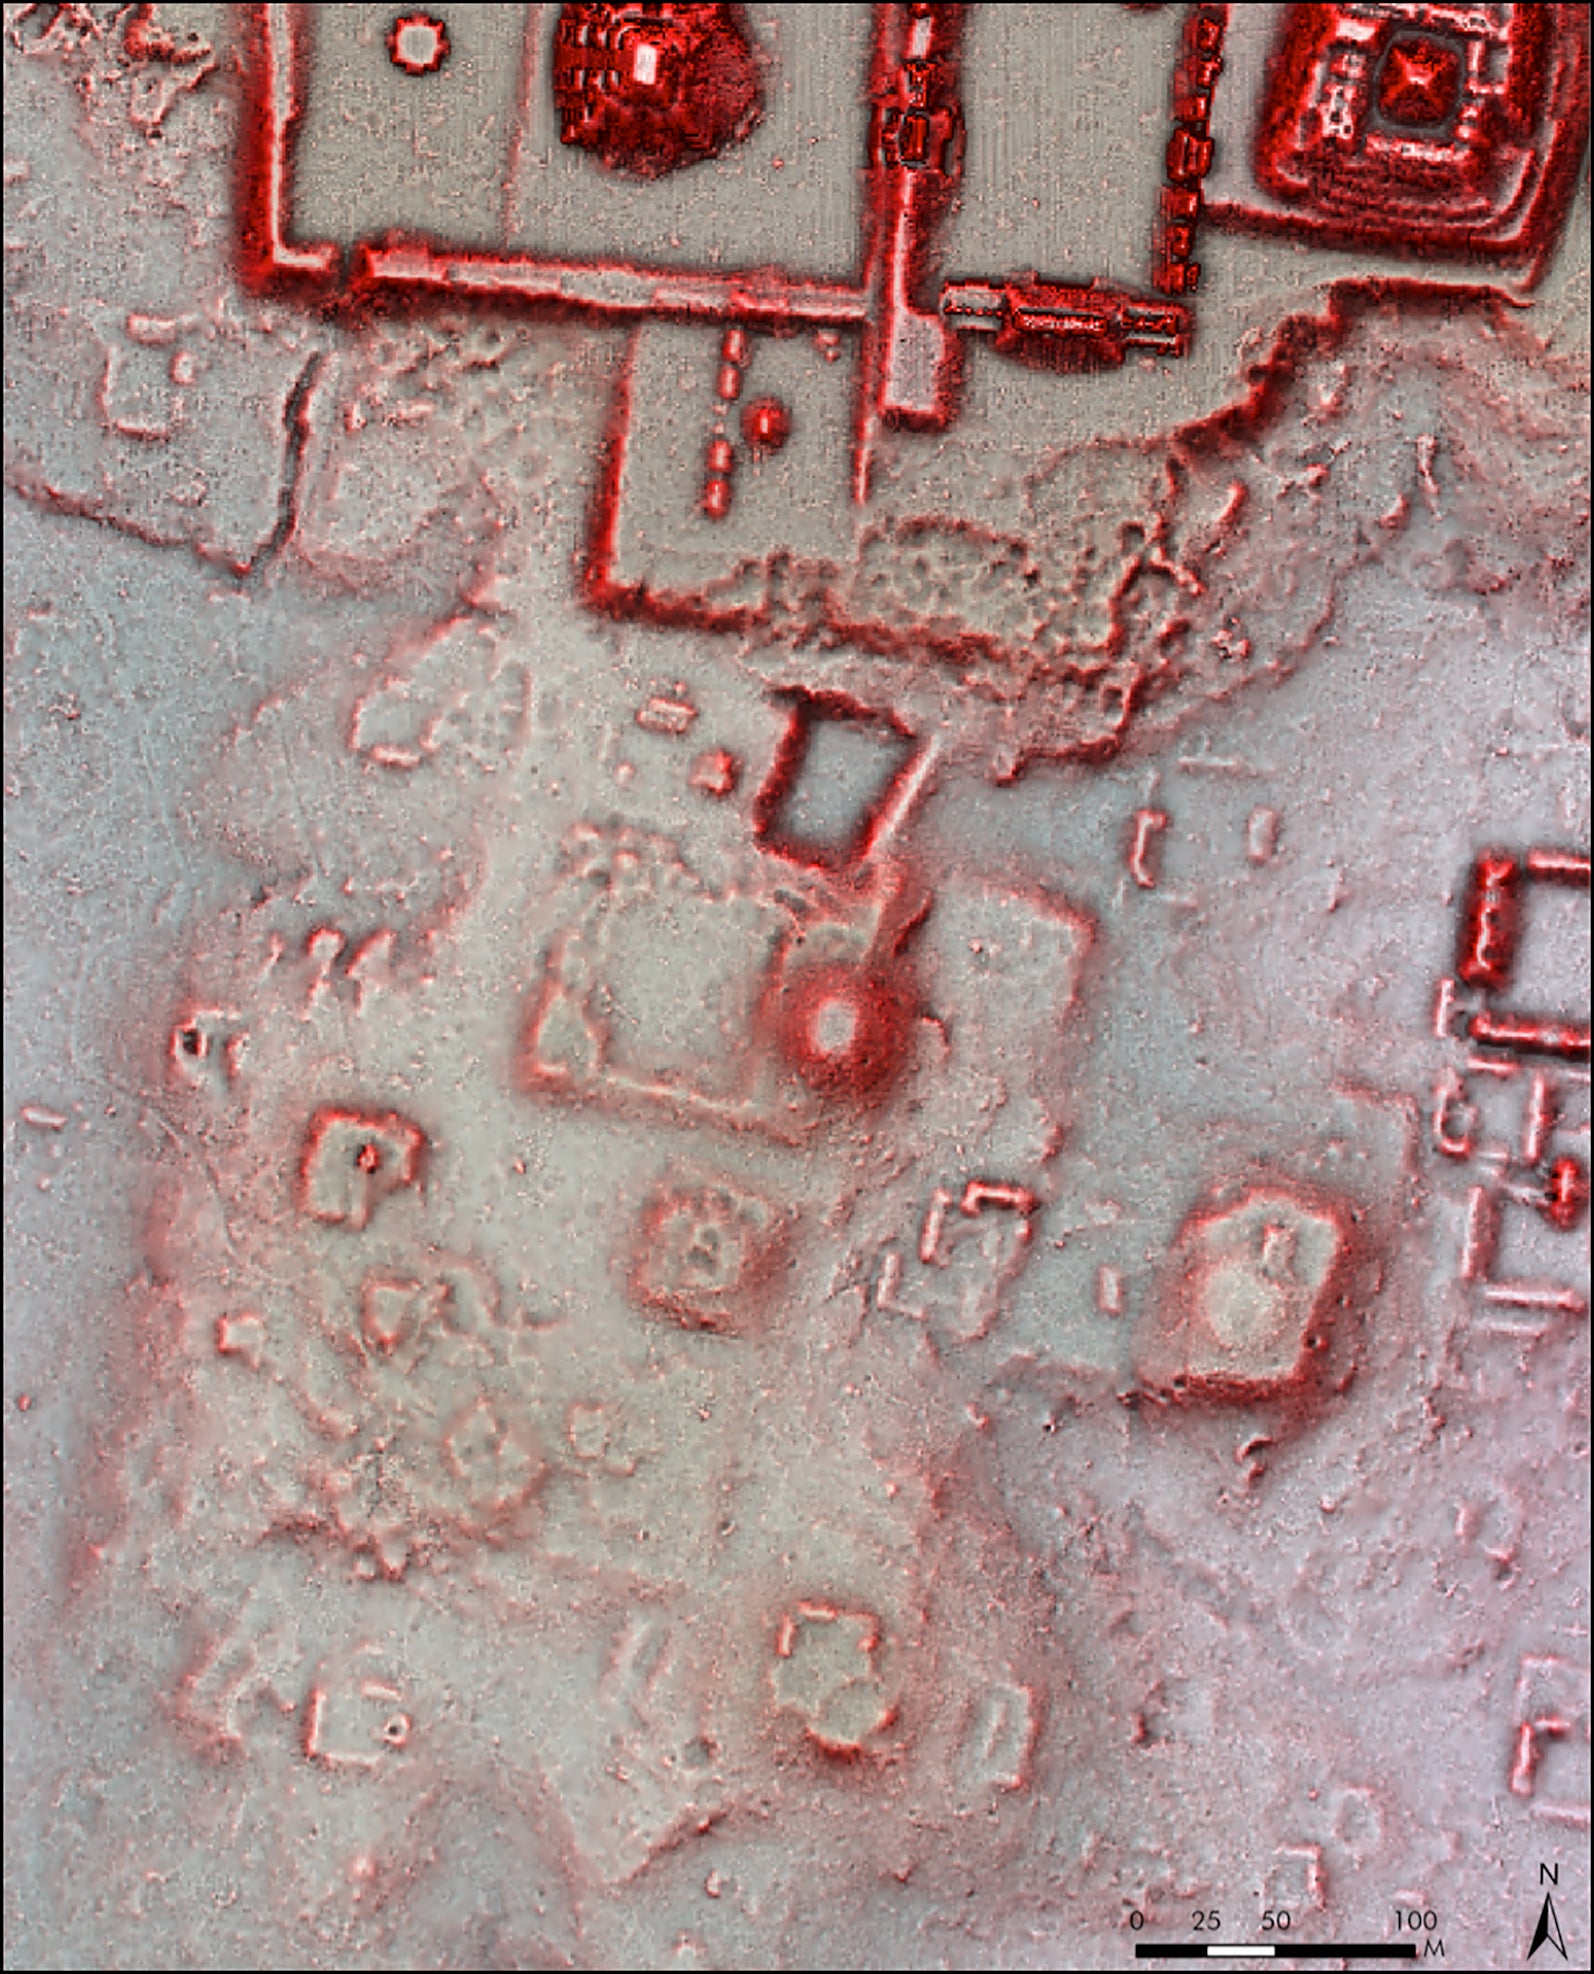 Filtered lidar image showing the structures at Tikal. (Image: T. Garrison/PACUNAM/Antiquity)